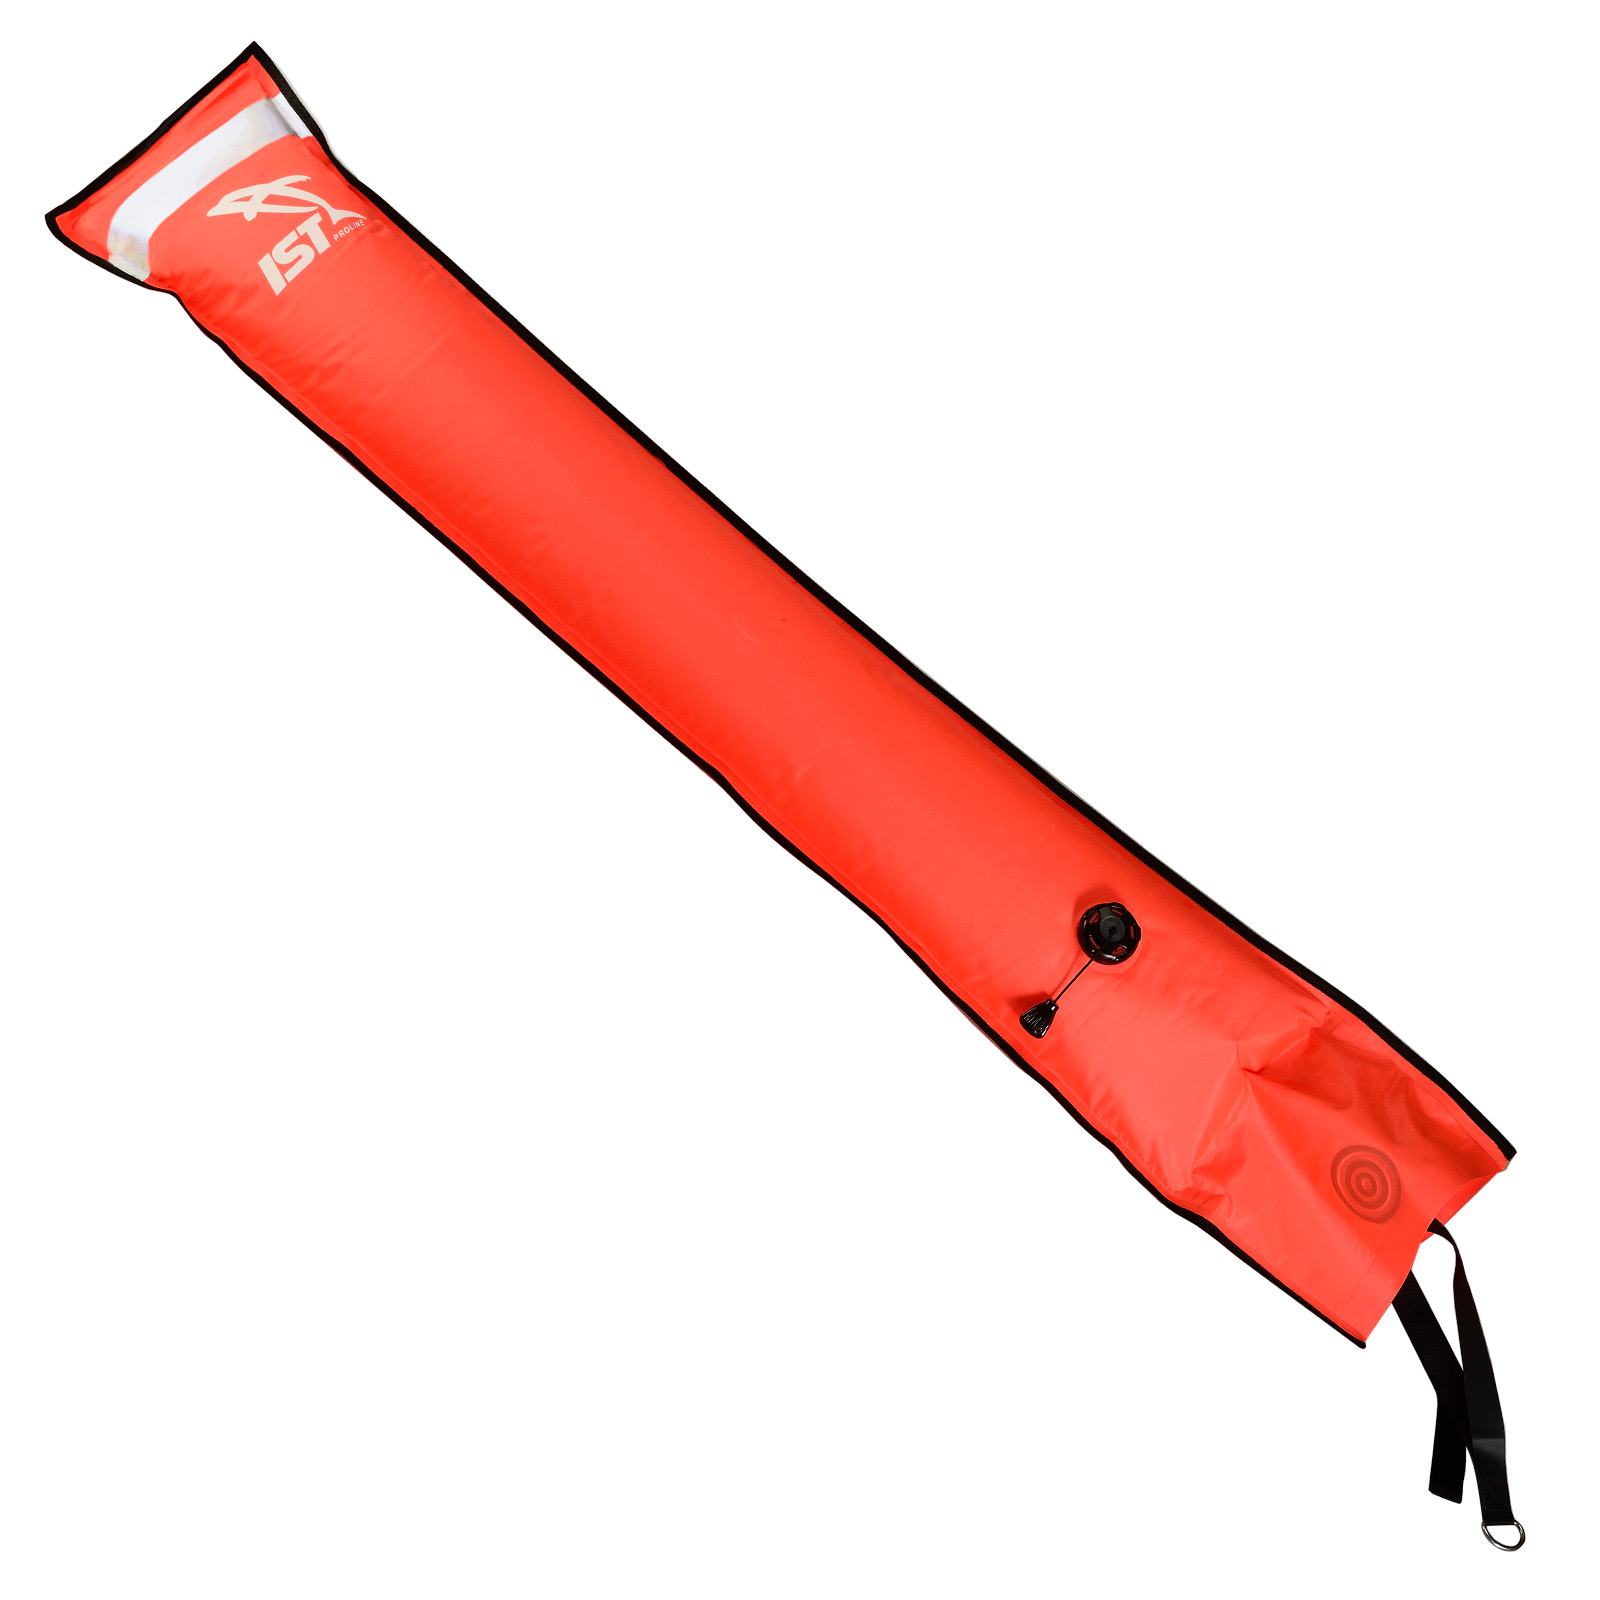 IST SB-7/R Surface Marker Buoy with Reflective Tape